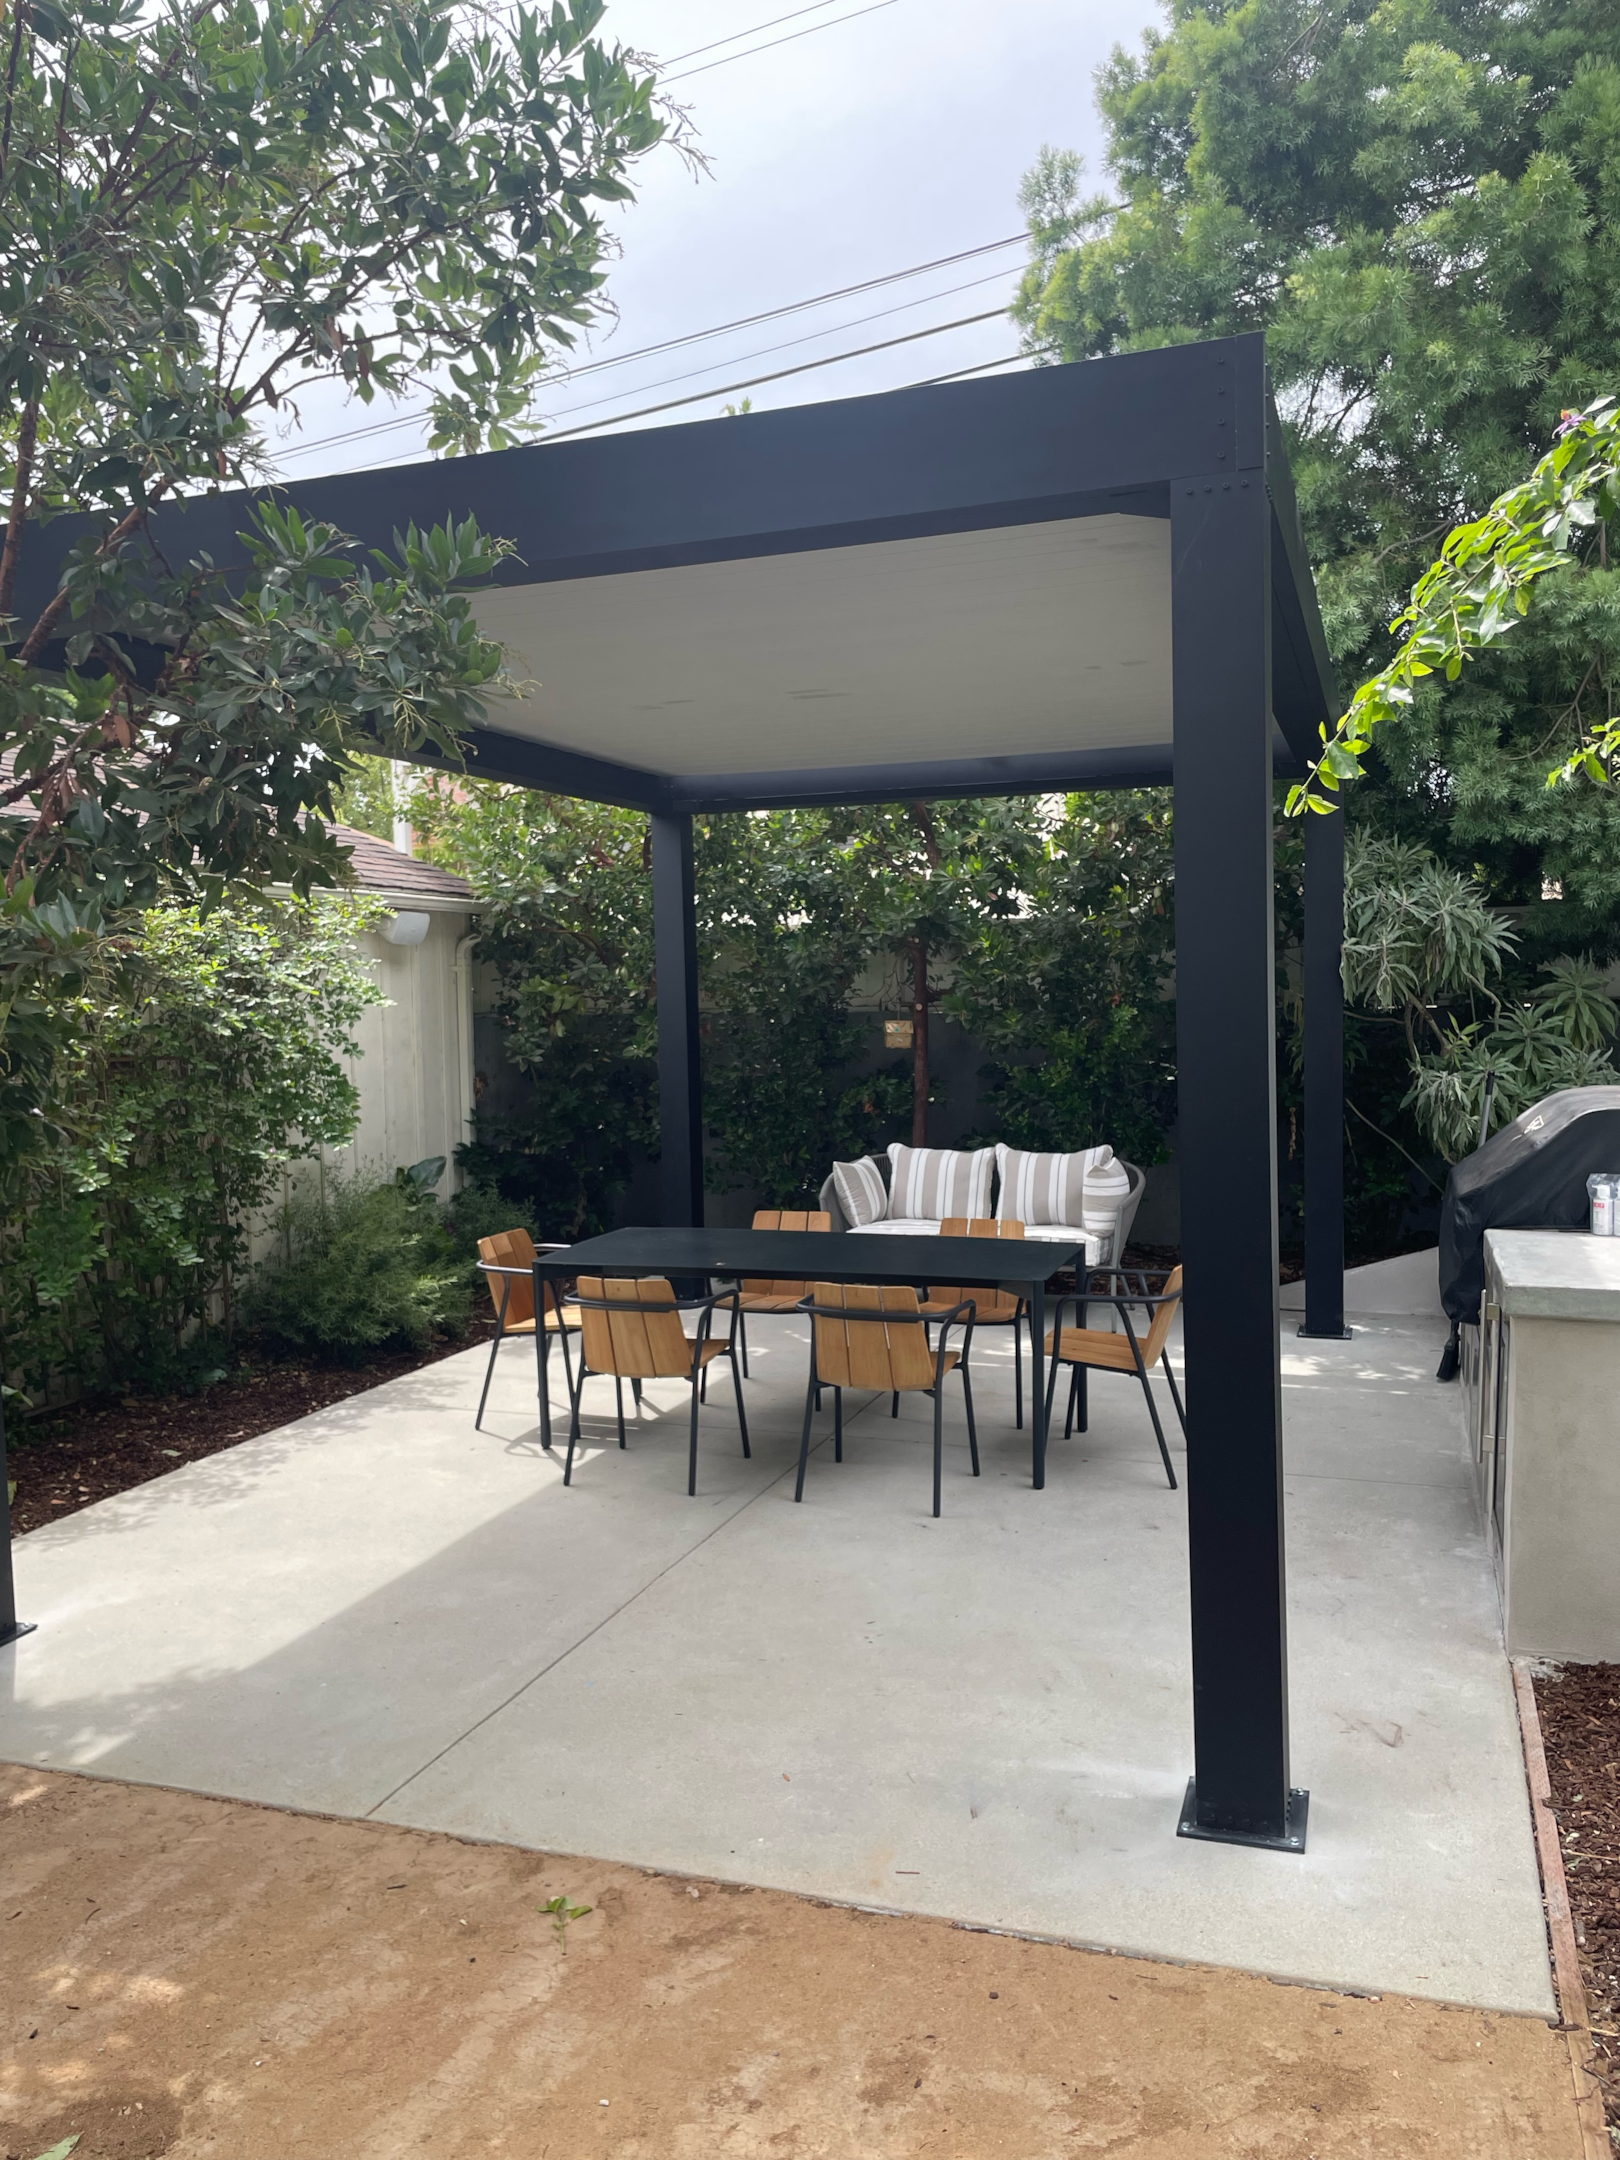 A pergola carport providing outdoor living space and protection from hot summer days